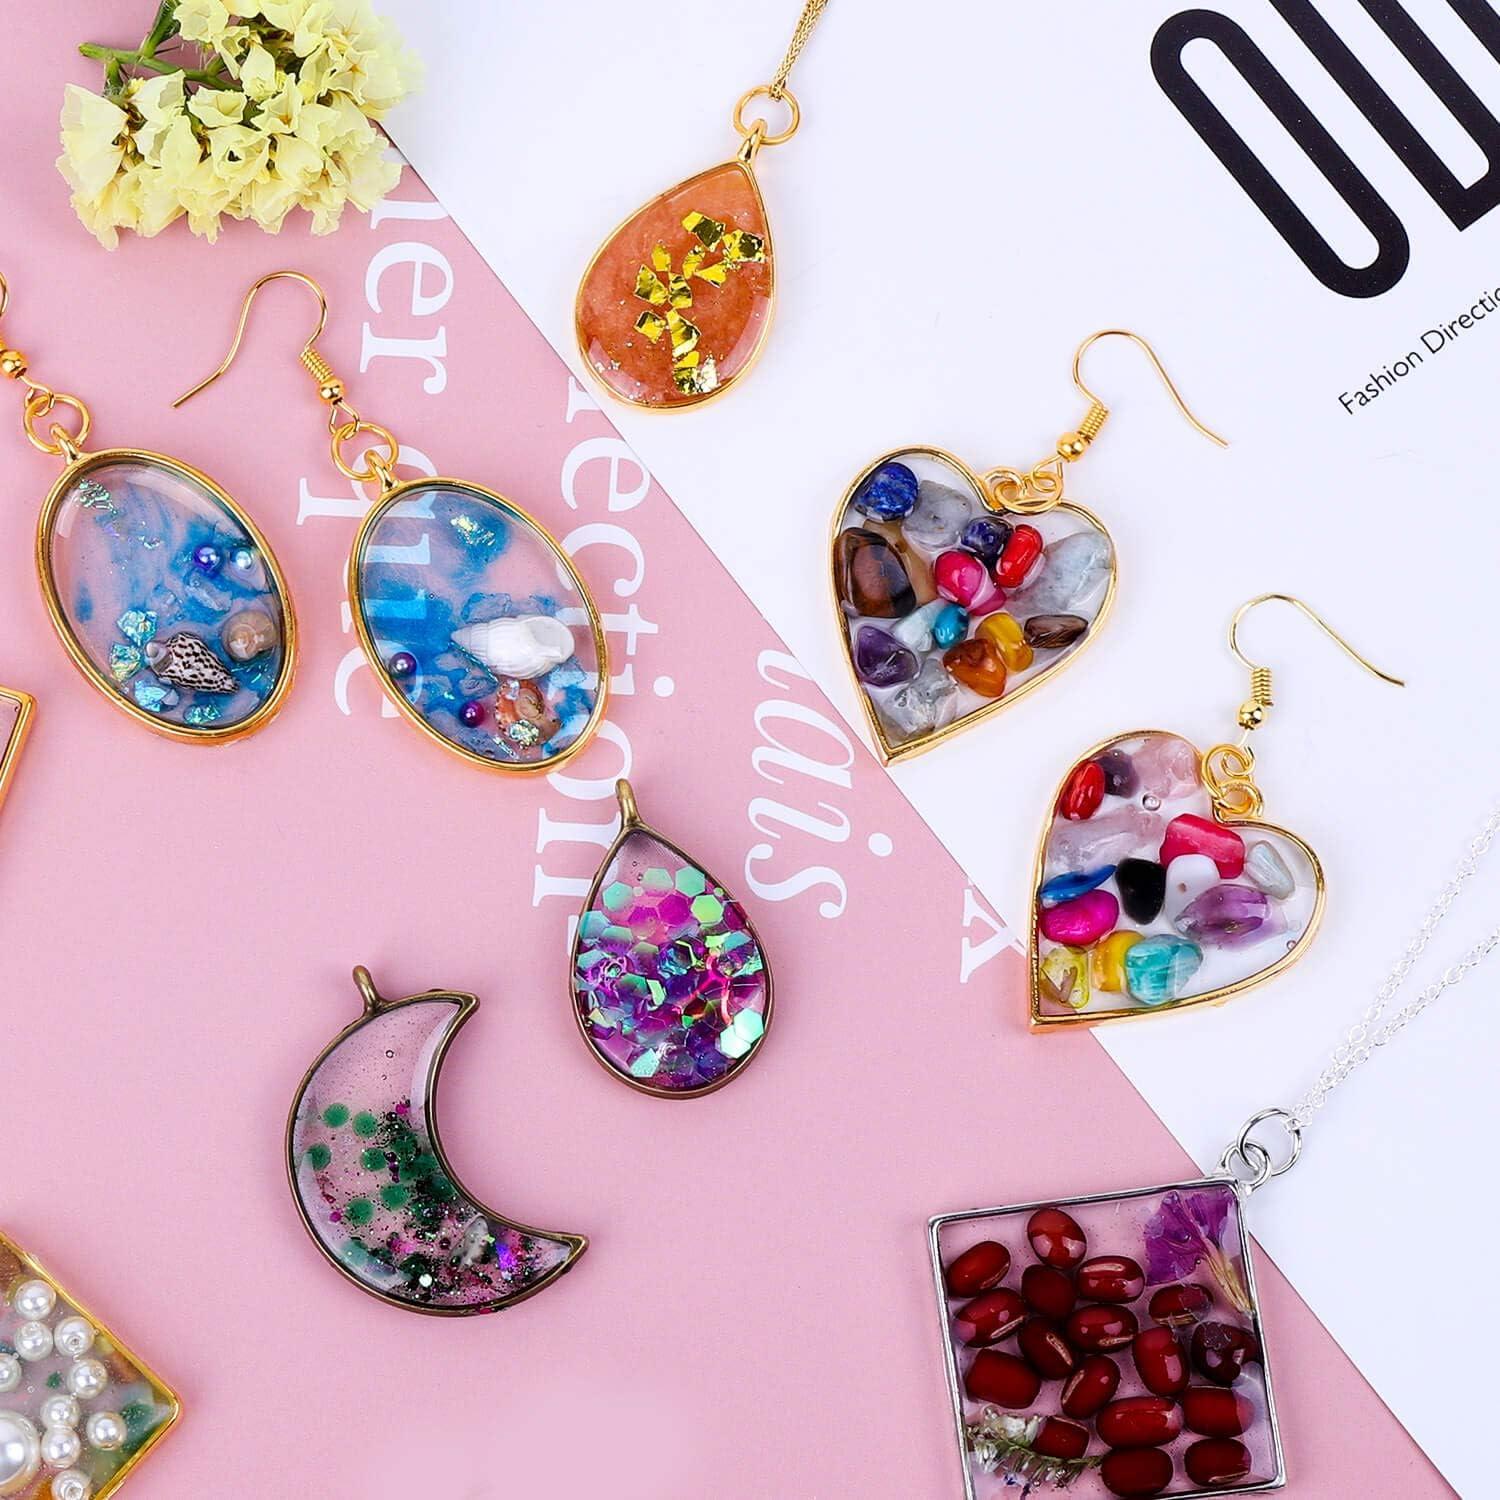 Resin Earring Mold For Making Earring Pendant Jewelry Craft